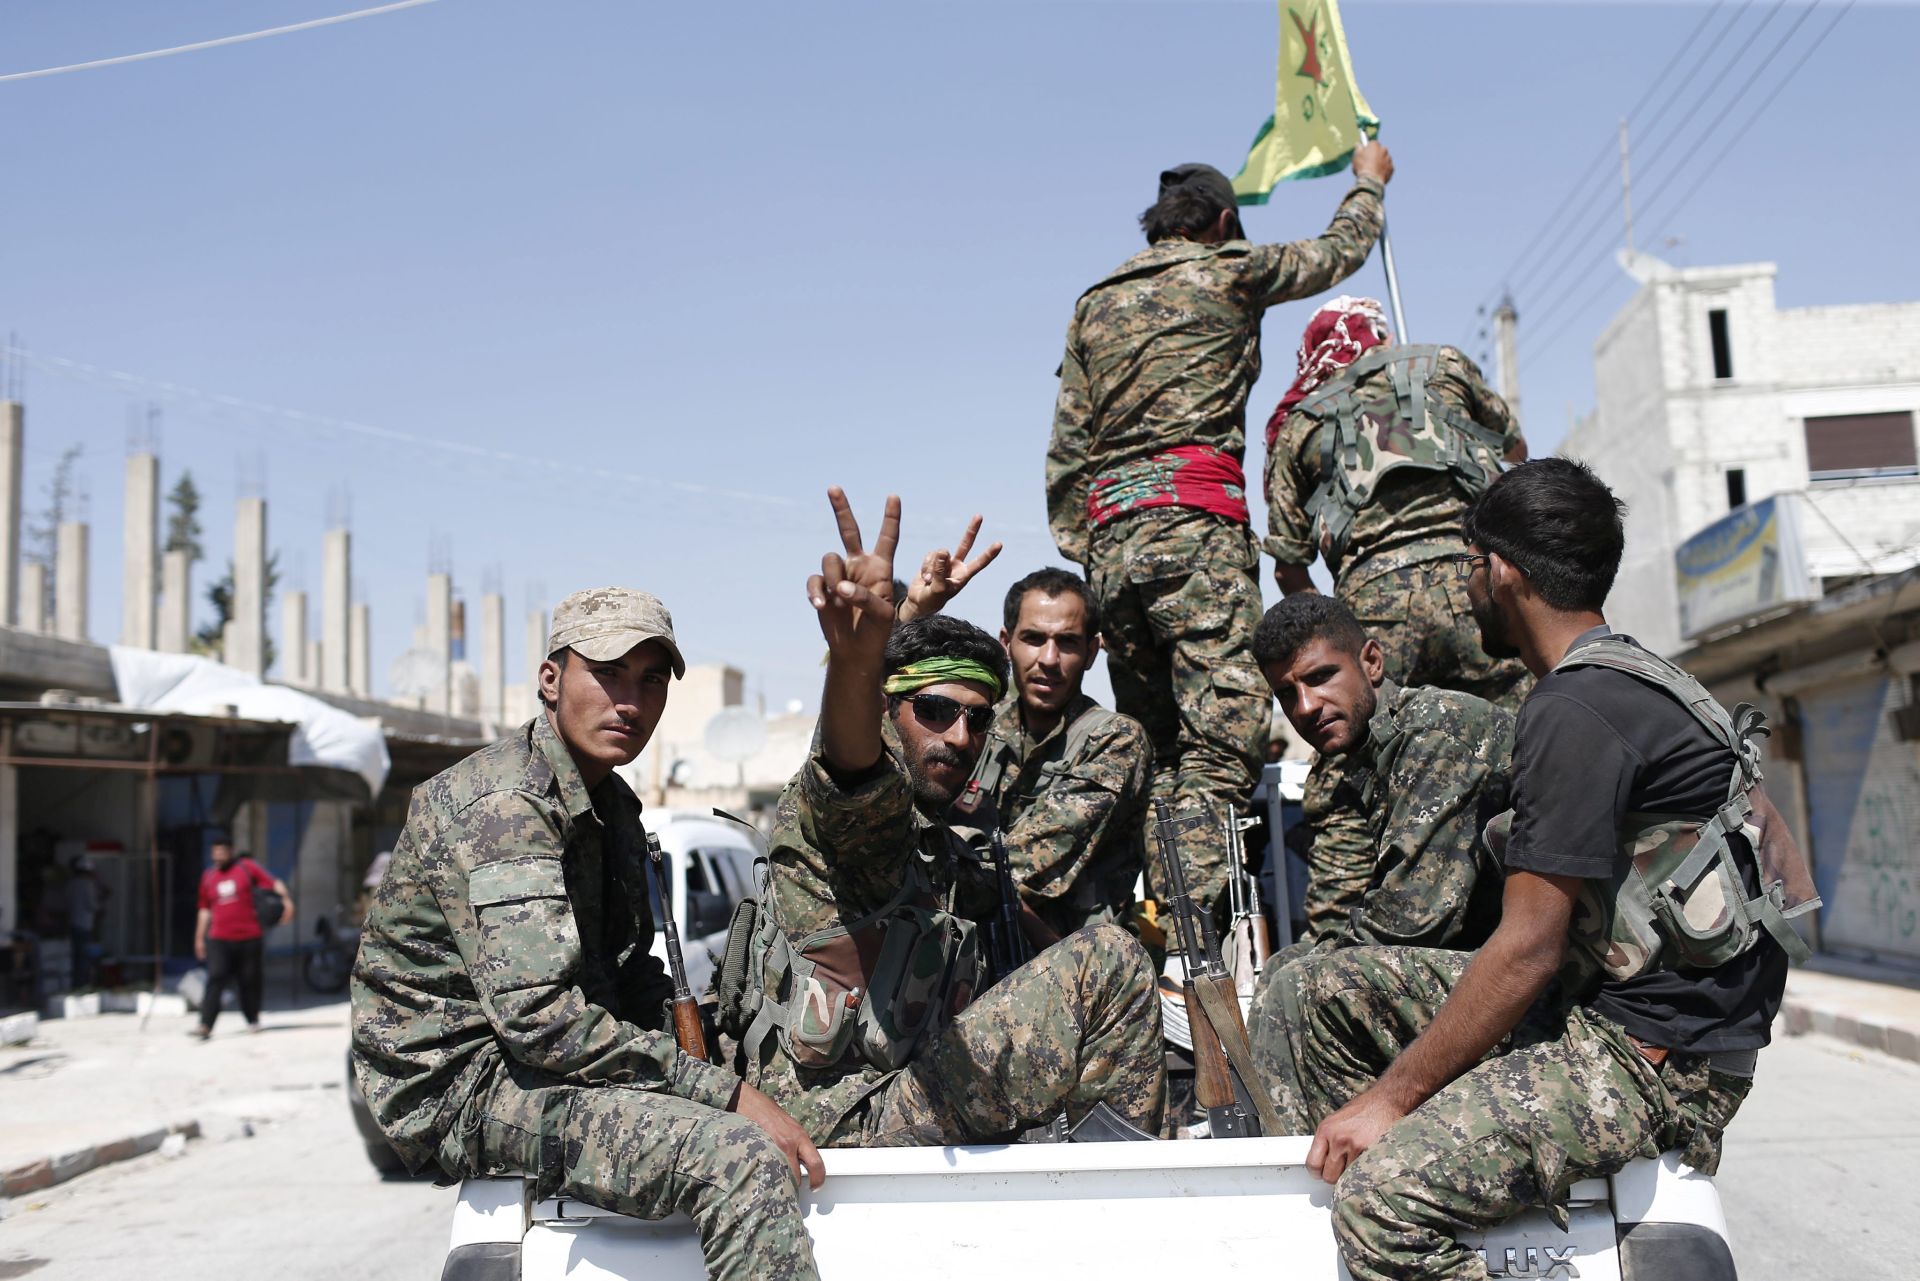 epa05620115 (FILE) A file photograph dated 23 June 2015 showing members of Kurdish People Defence Units (YPG) flashing victory sign after coming from Syrian town of al-Raqqa, in Tel Abyad, Syria. Reports state the Syrian Democratic Forces (SDF) announced on 06 November 2016 that it had started a military campaign to liberate the northern Syrian city of Raqqa, the main stronghold of the Islamic State militant group in Syria. SDF is an umbrella group gathering Kurdish and Arab rebels fighting in Syria.  EPA/SEDAT SUNA